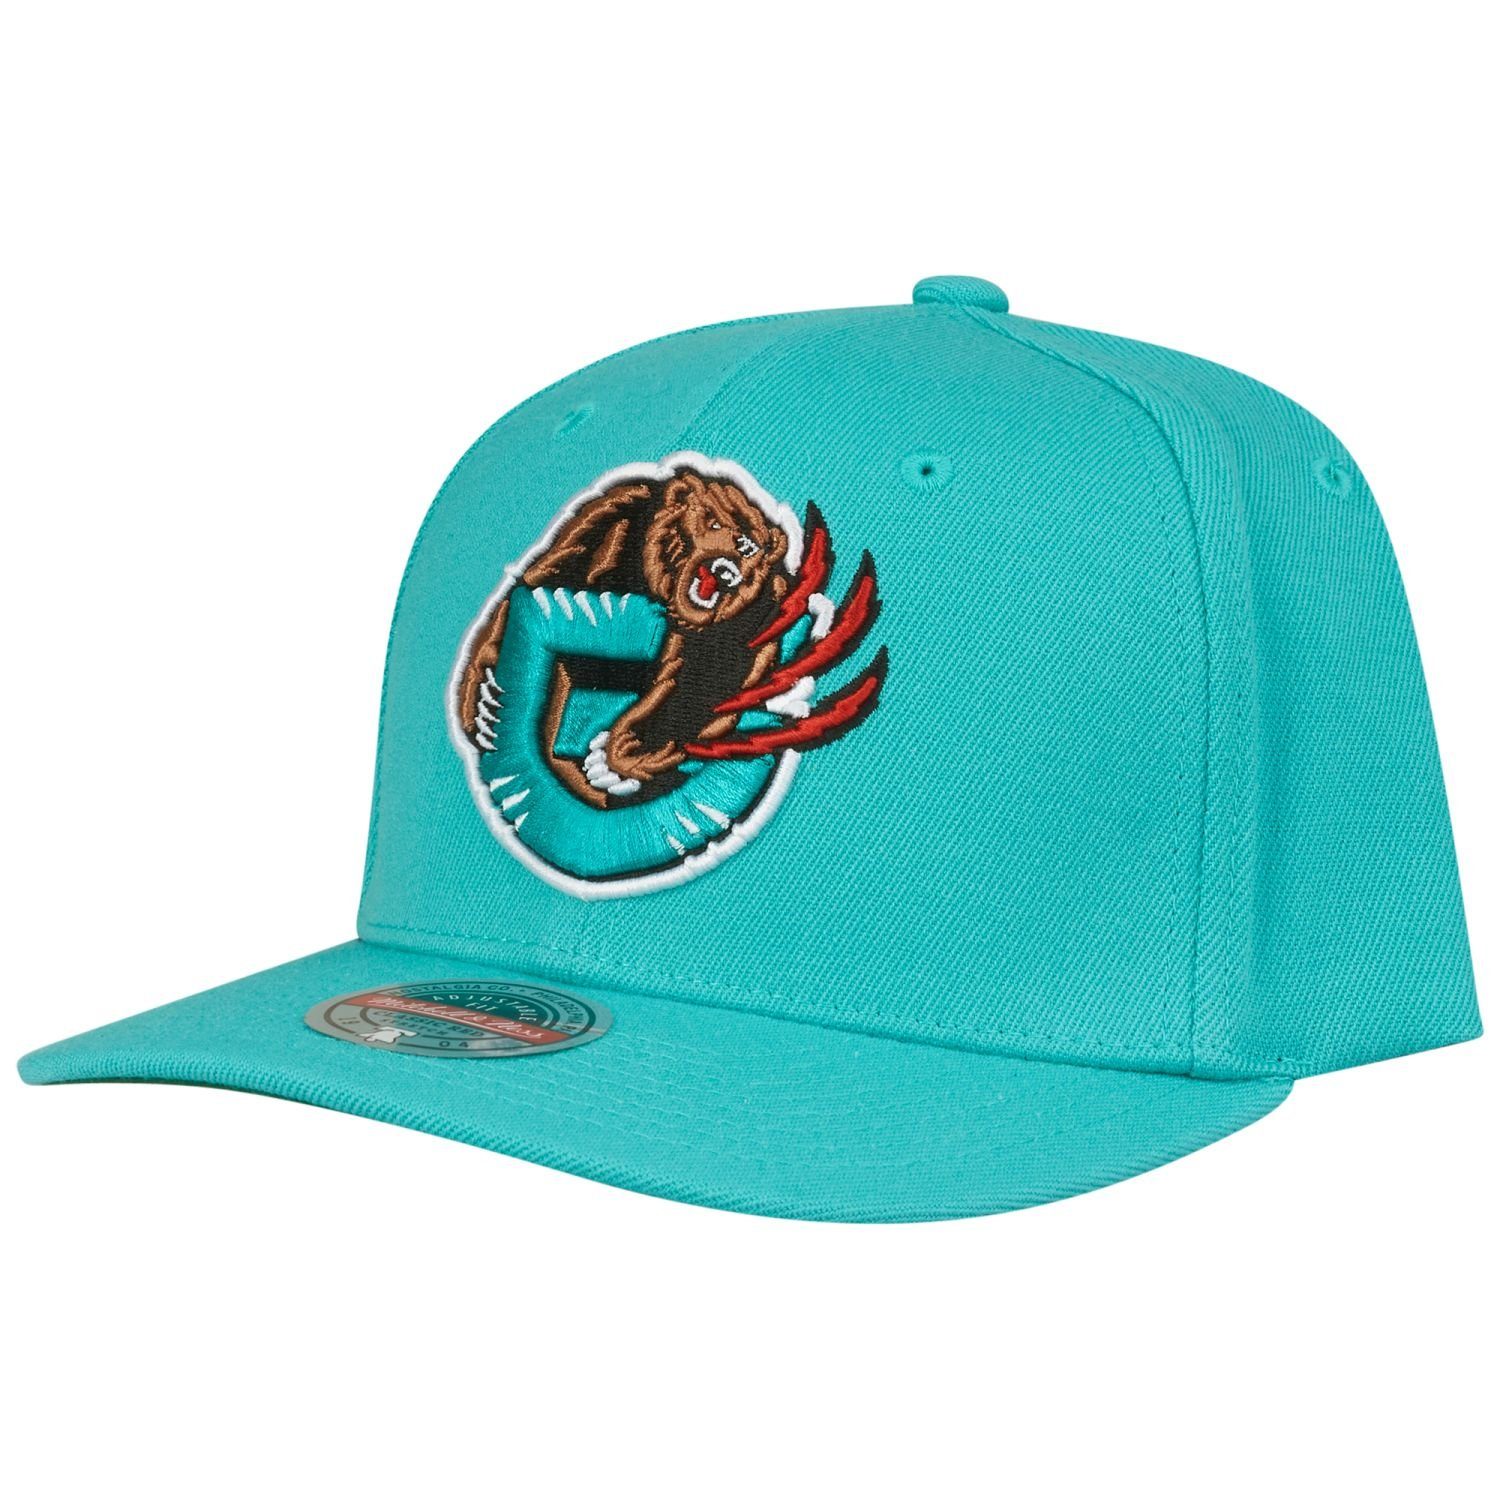 Mitchell & Ness Snapback Cap Stretch HWC Vancouver Grizzlies